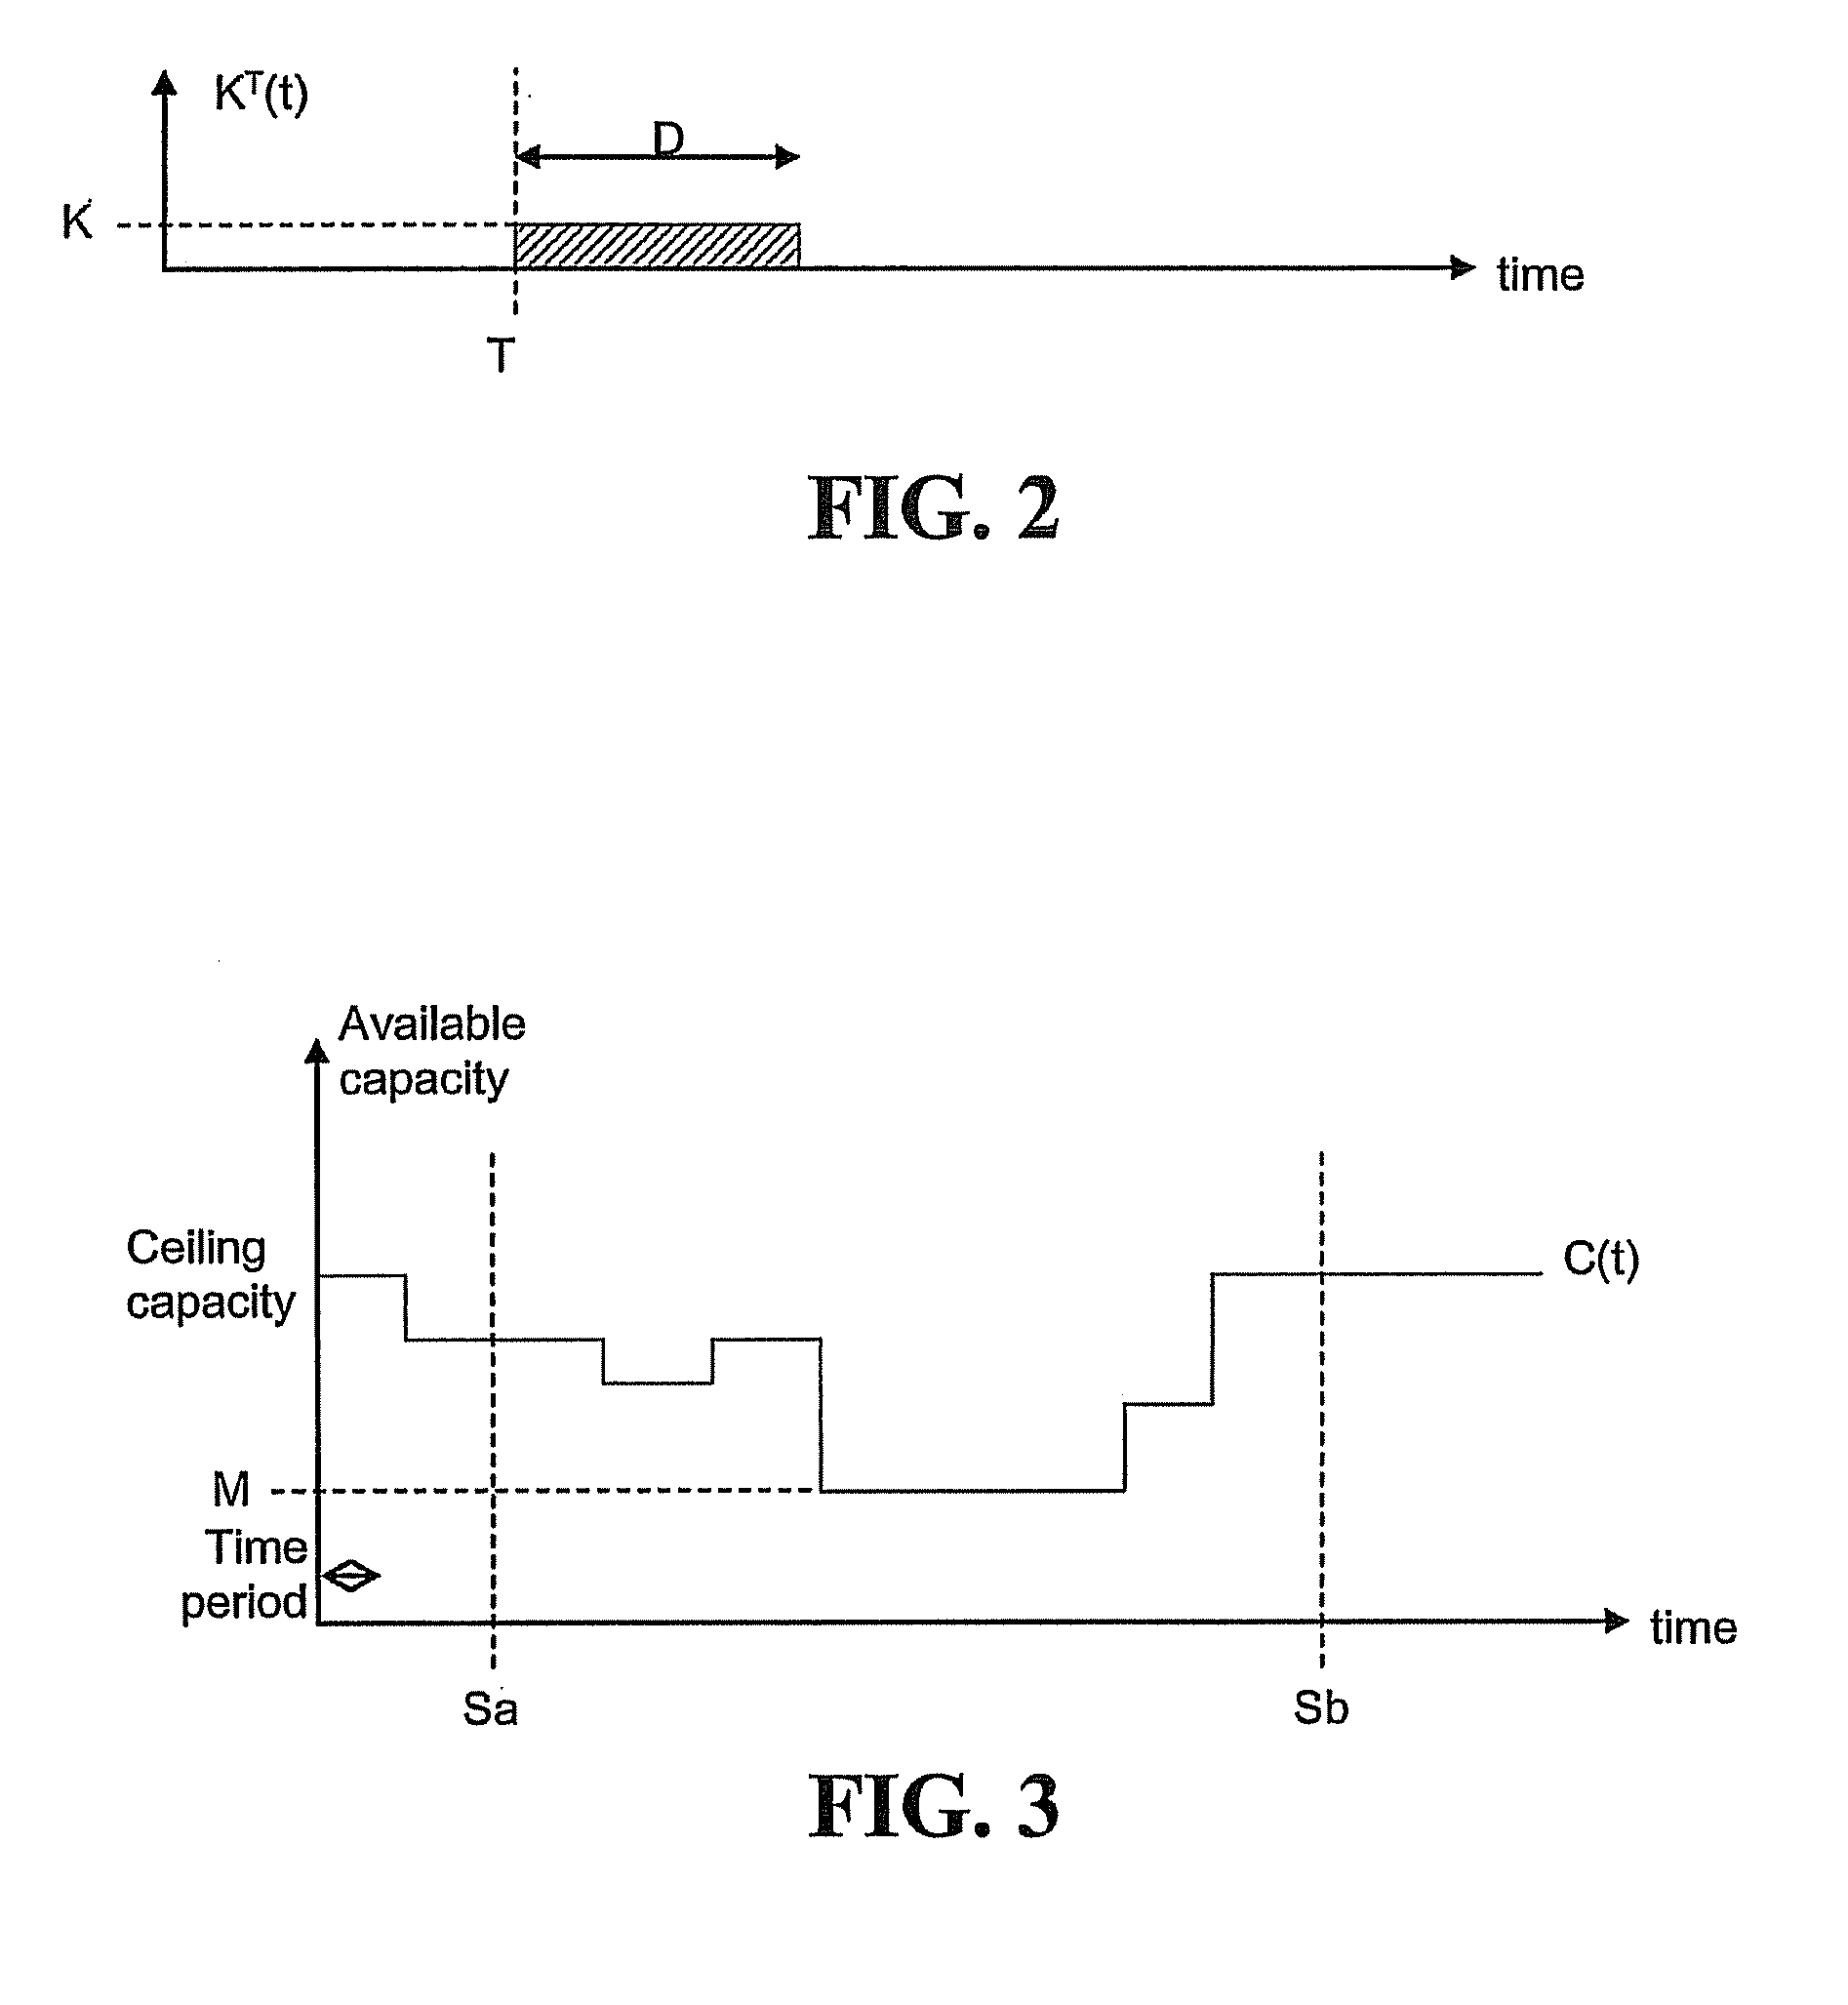 System and methods for scheduling power usage